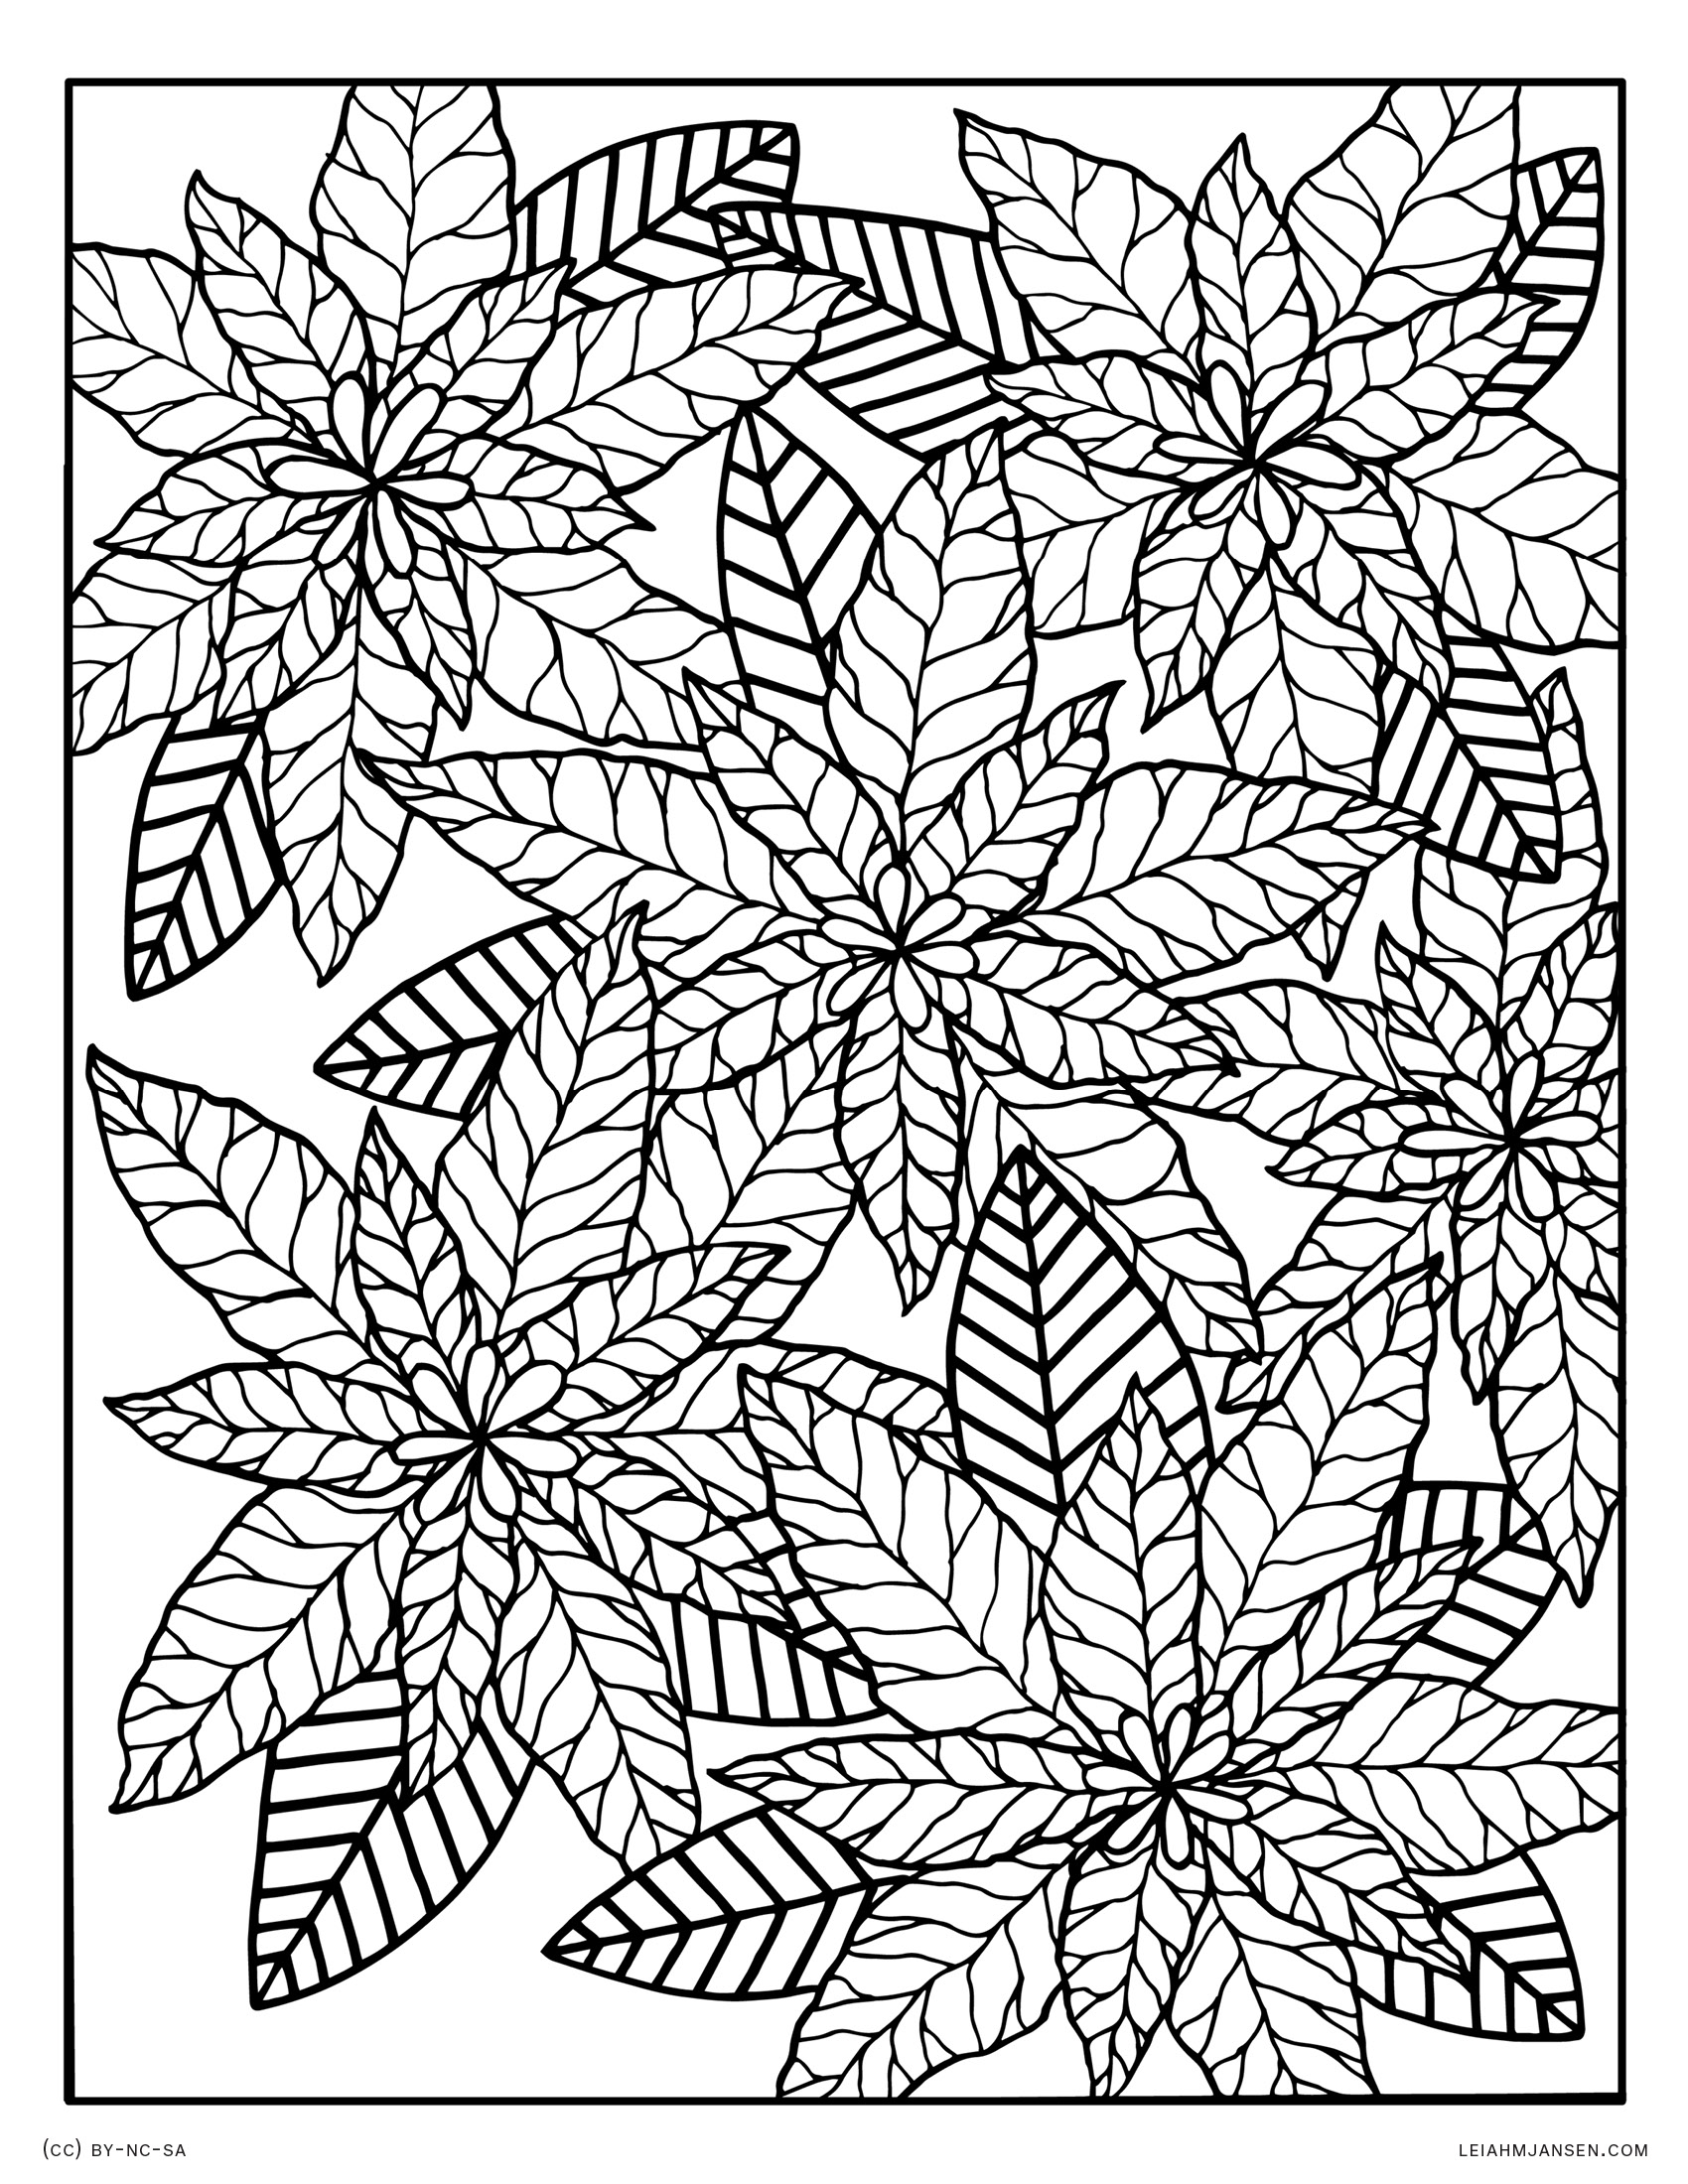 10 Best Ideas Coloring Pages for Adults Holidays - Best Coloring Page